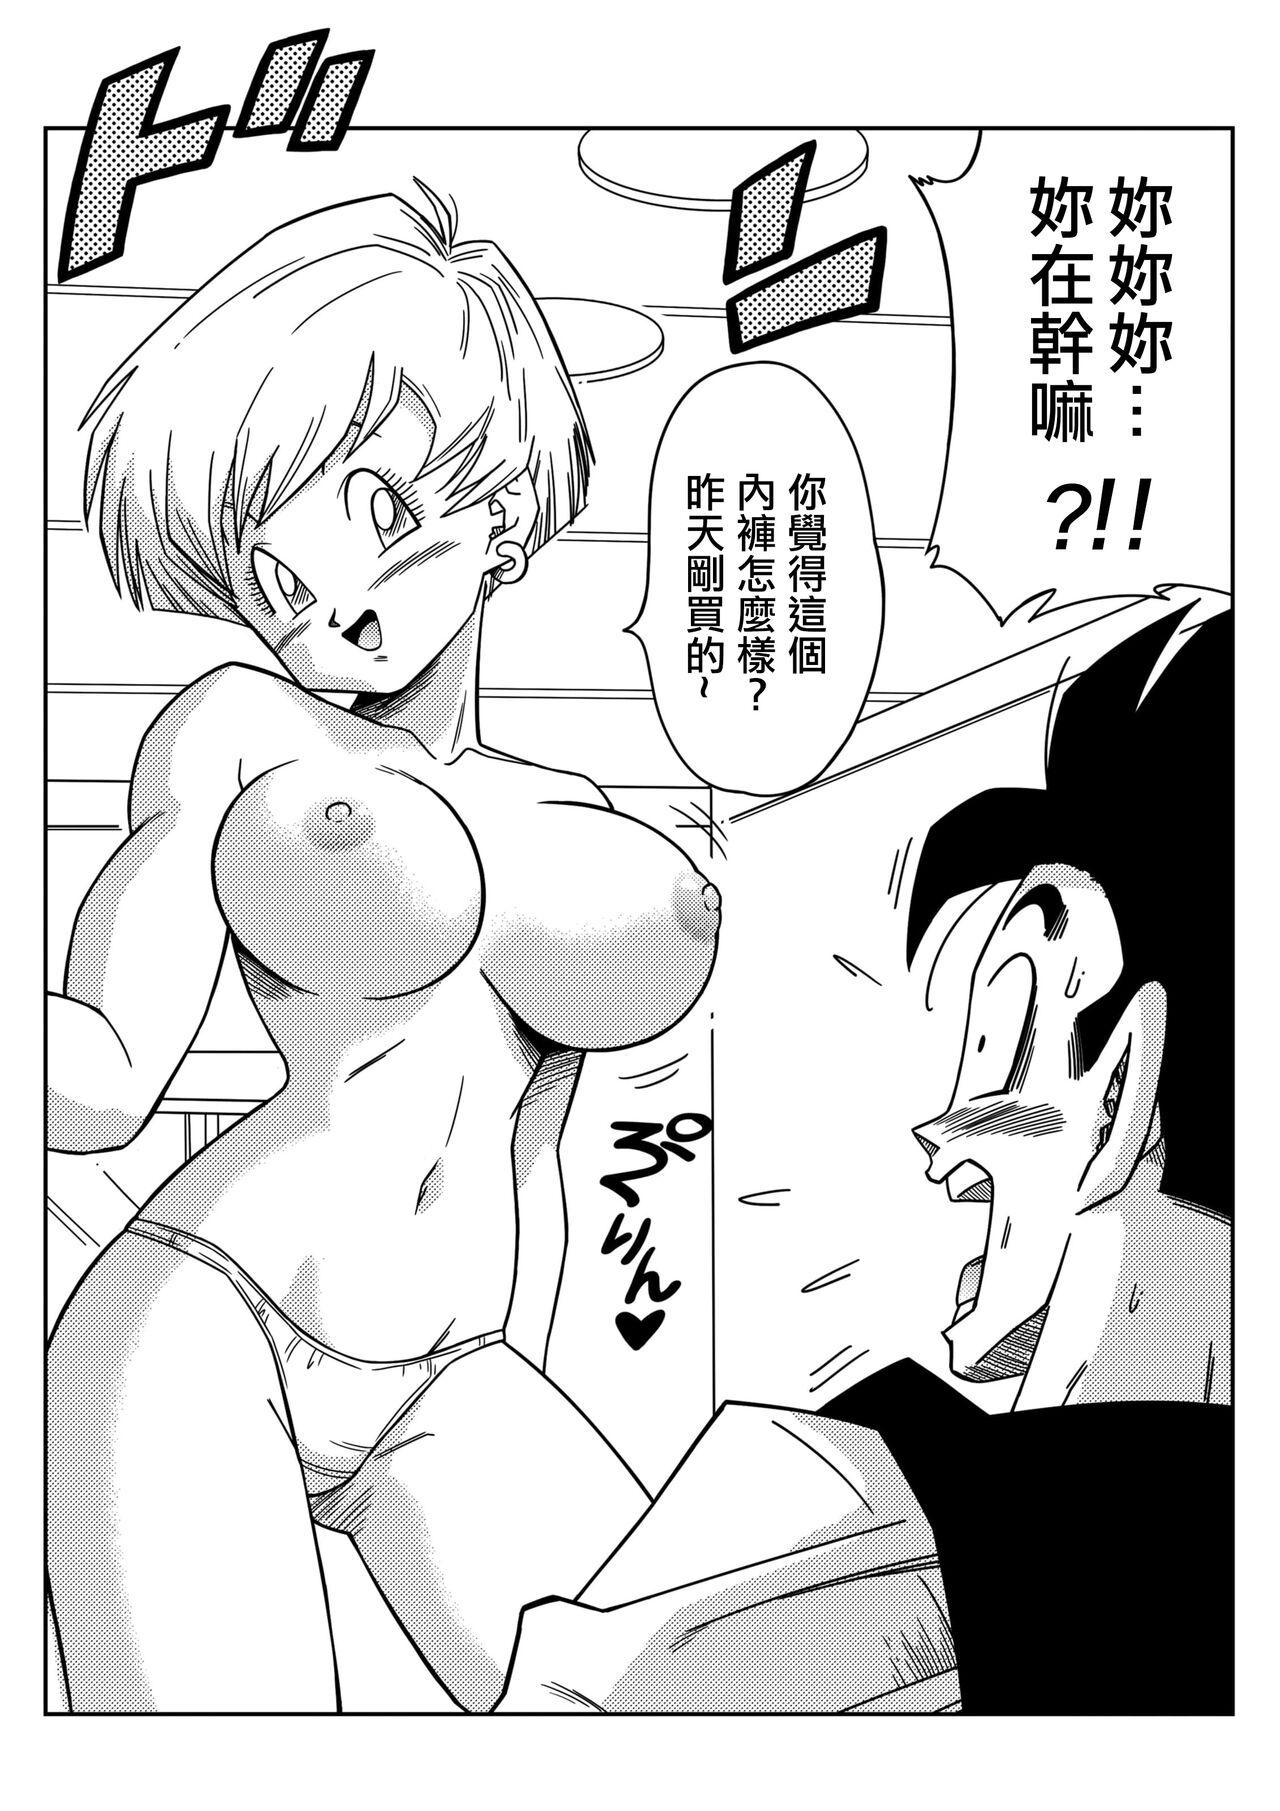 Students LOVE TRIANGLE Z PART 1 - Dragon ball z Amateurs - Page 7